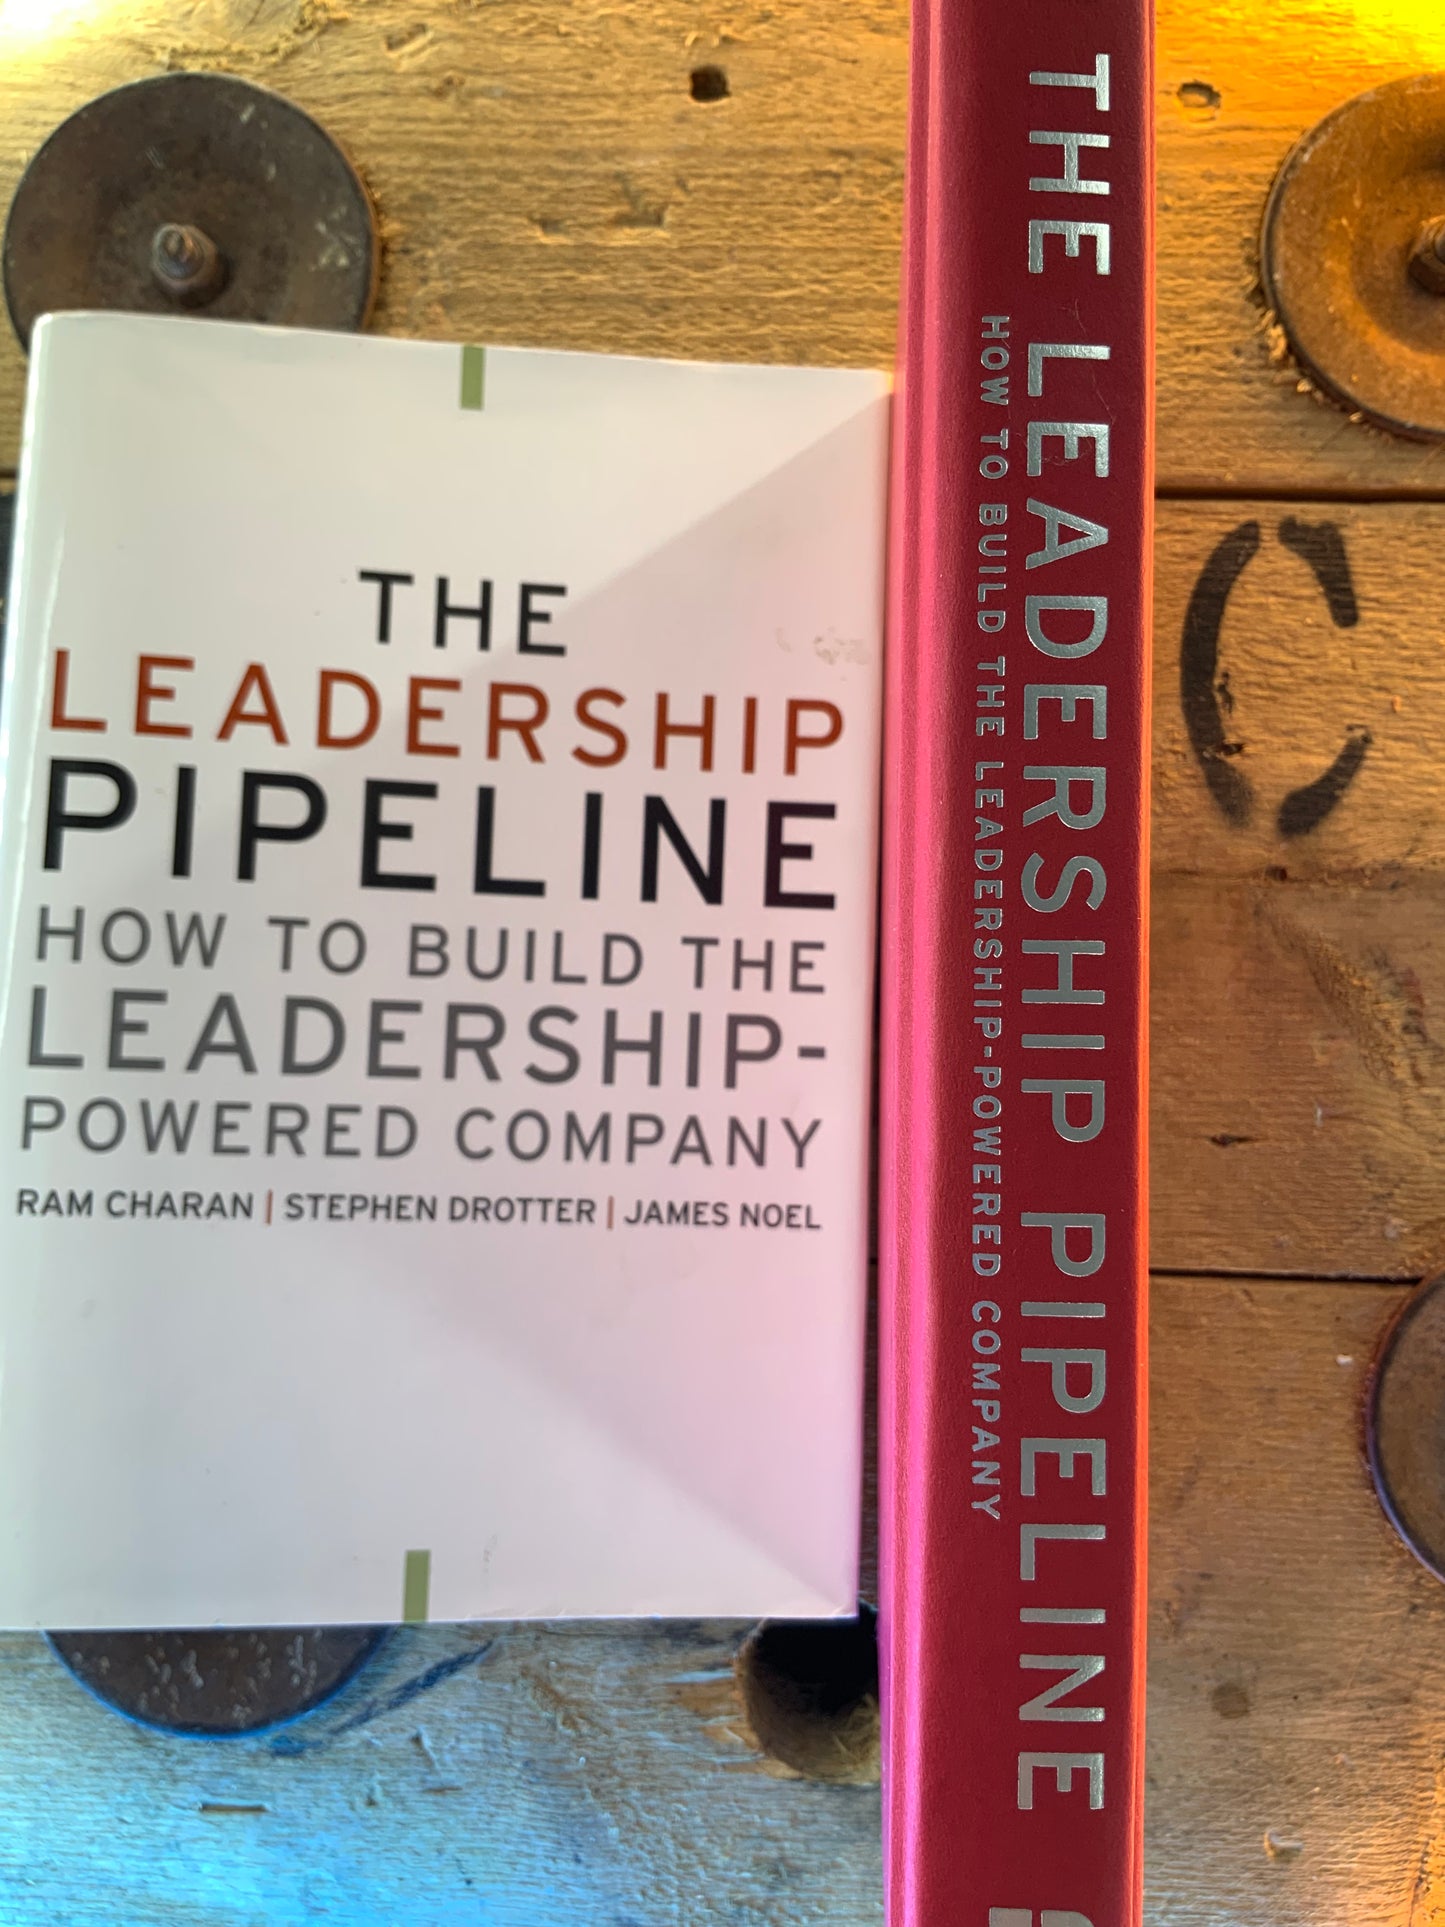 The leadership pipeline : how to build the leadership powerful company